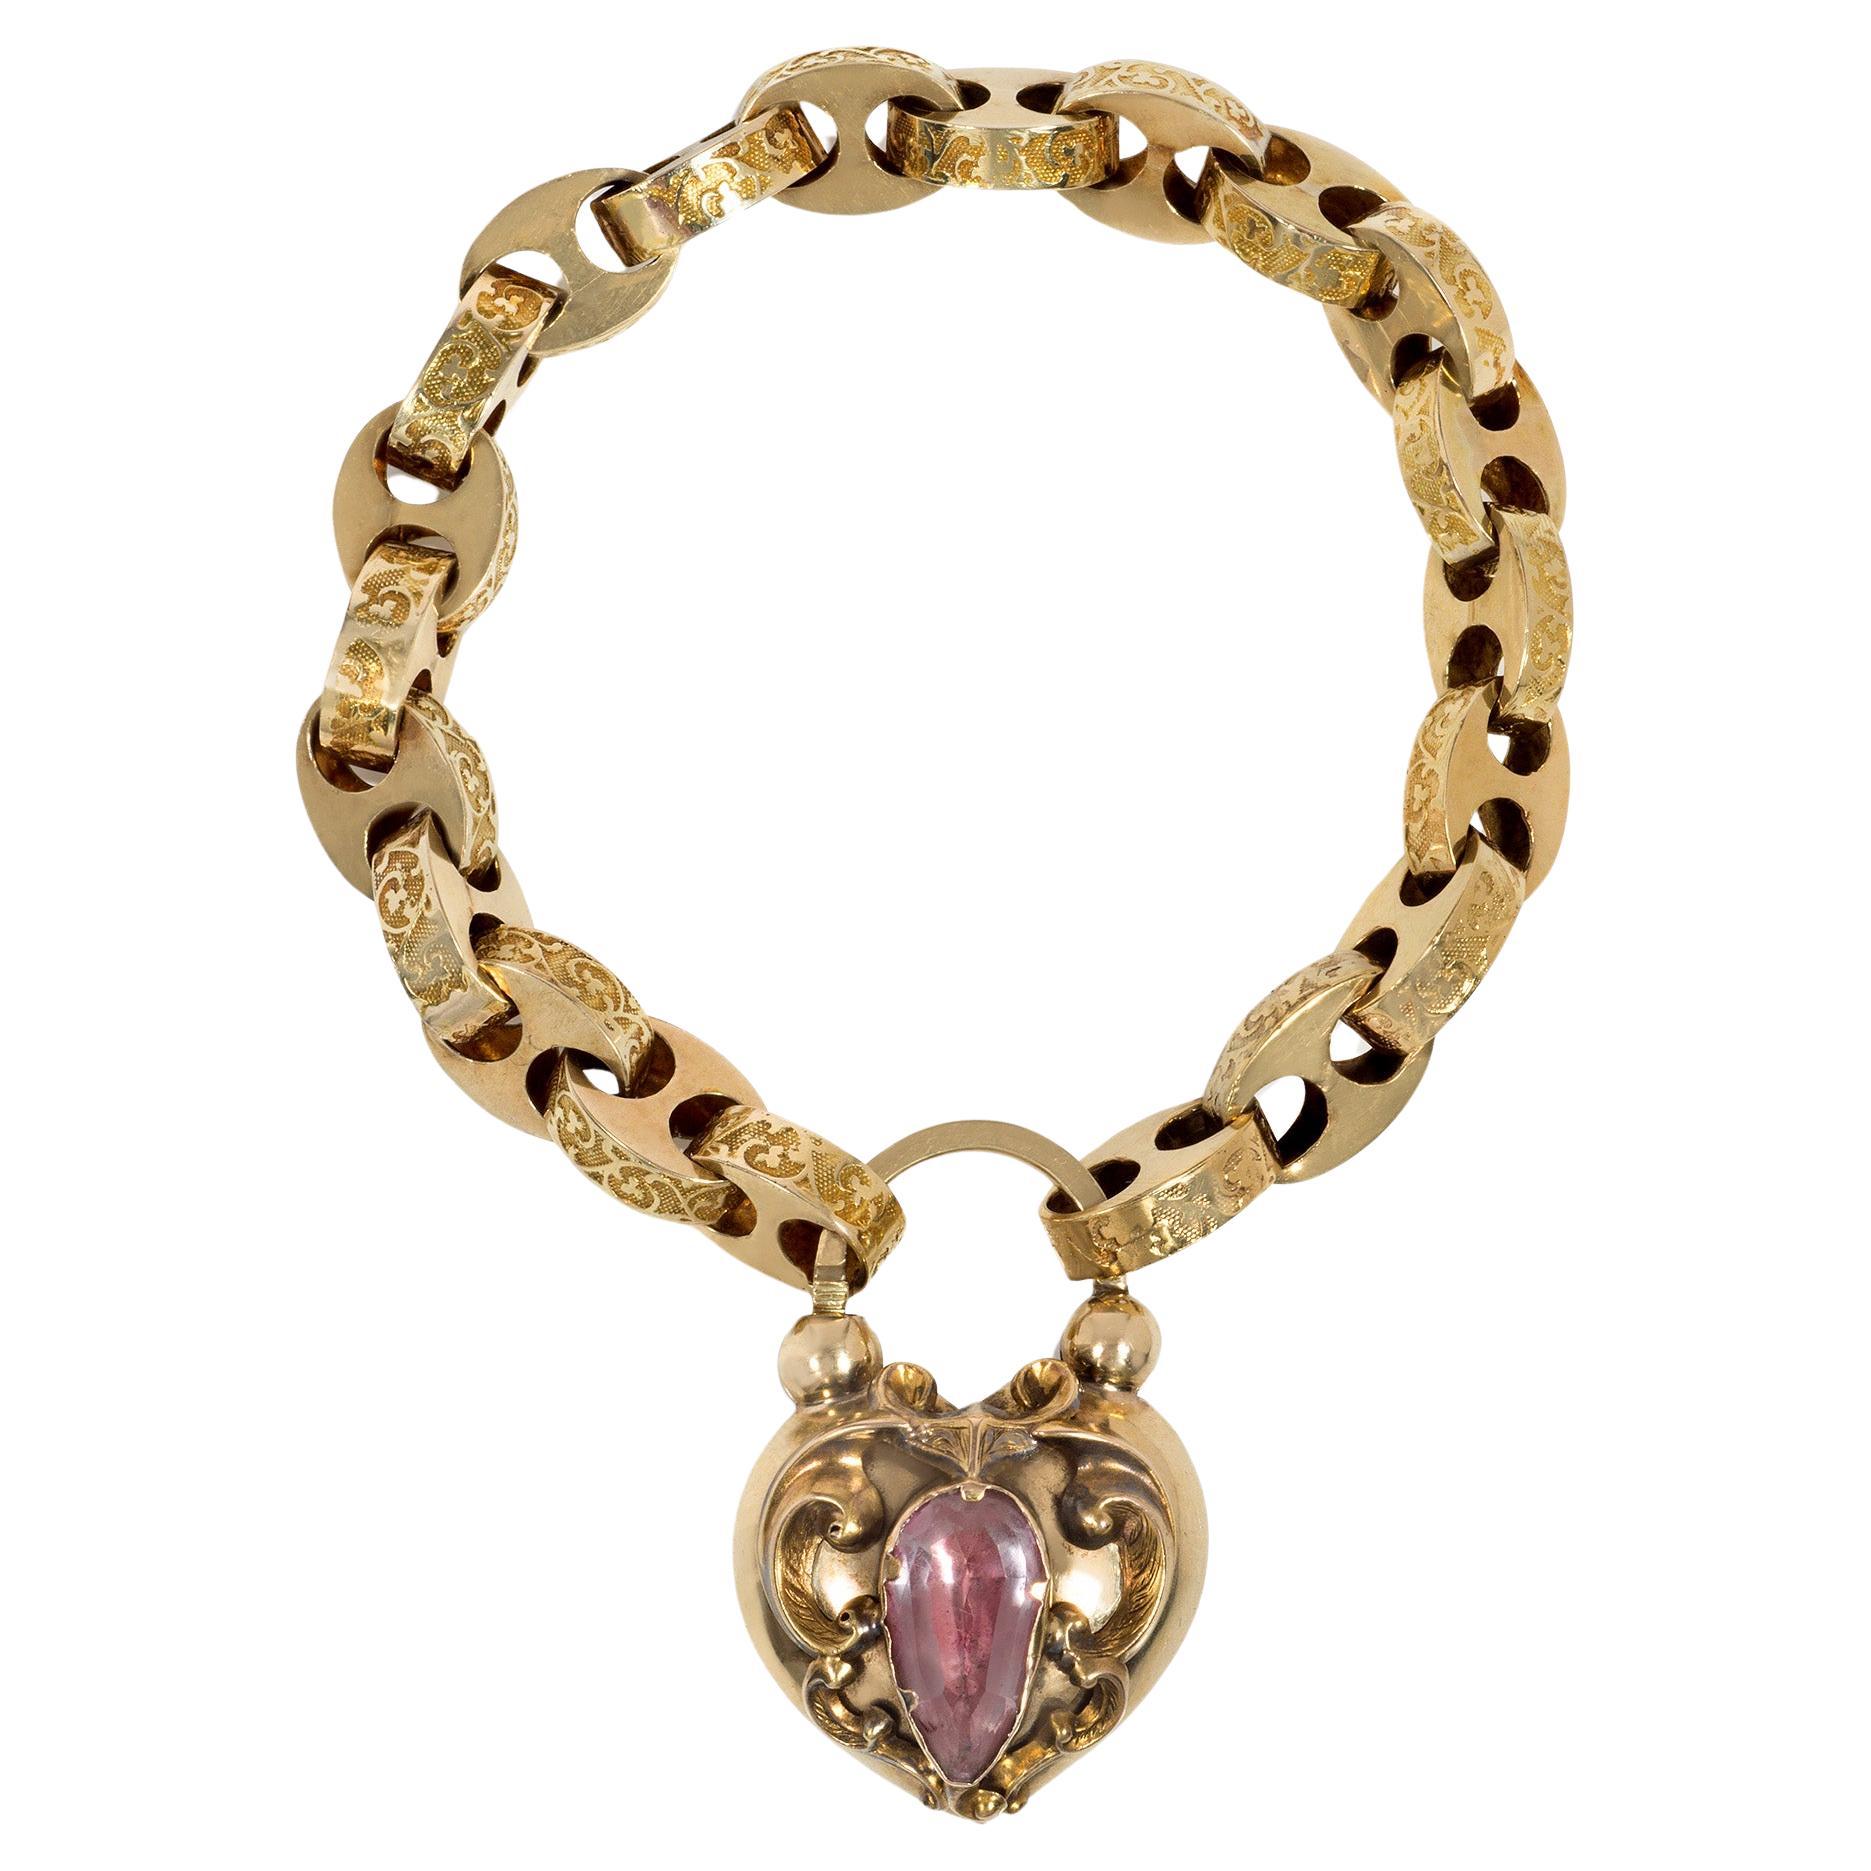 Antique Victorian Gold and Pink Topaz Bracelet with Heart-Shaped Padlock Clasp